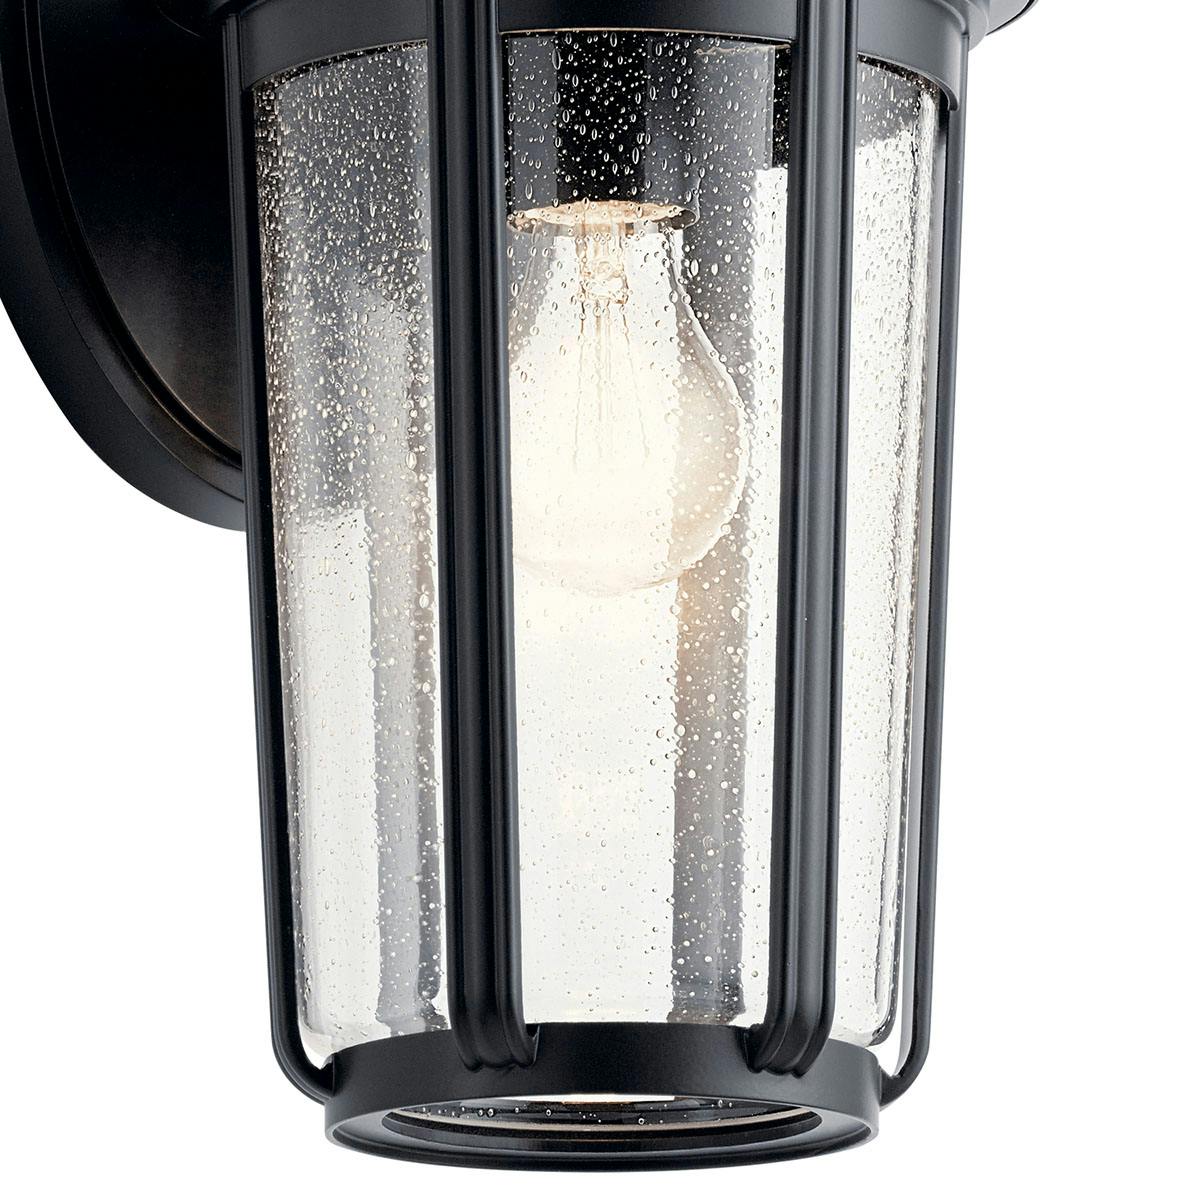 Close up view of the Fairfield 14.5" 1 Light Wall Light Black on a white background